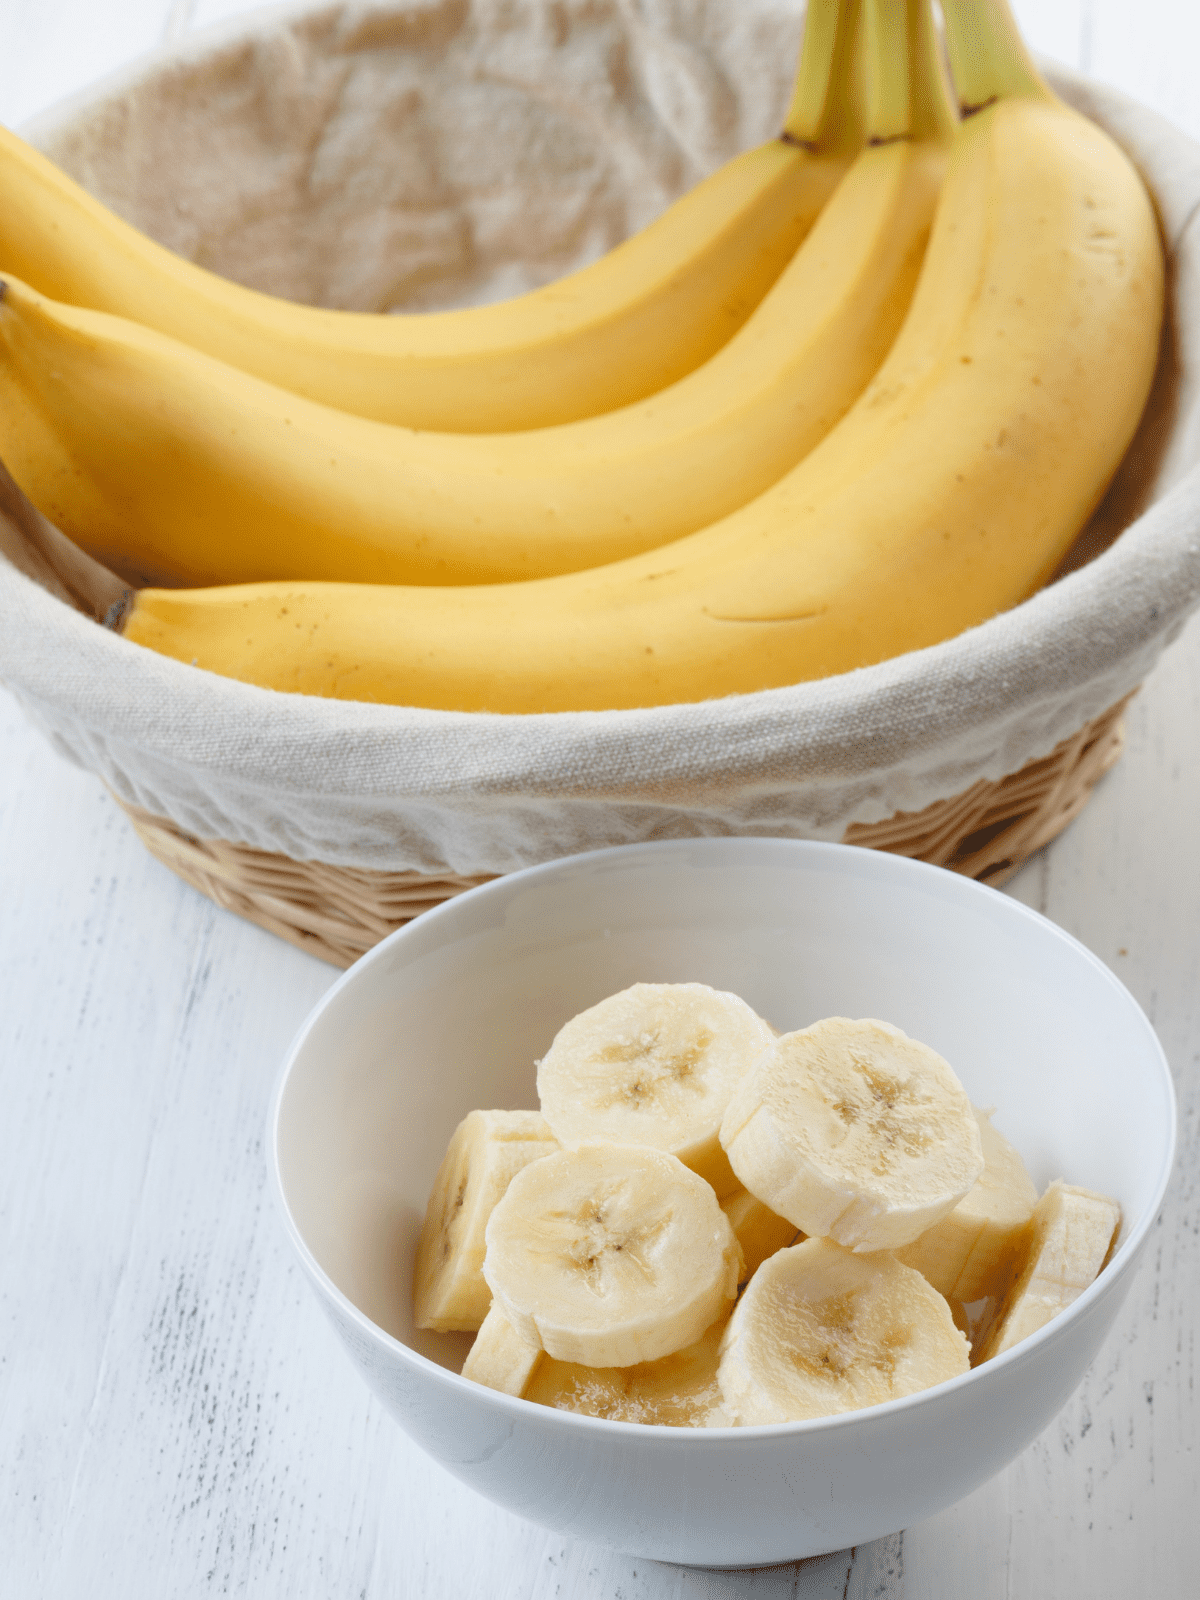 Bananas sliced in a bowl and  a bunch of bananas.